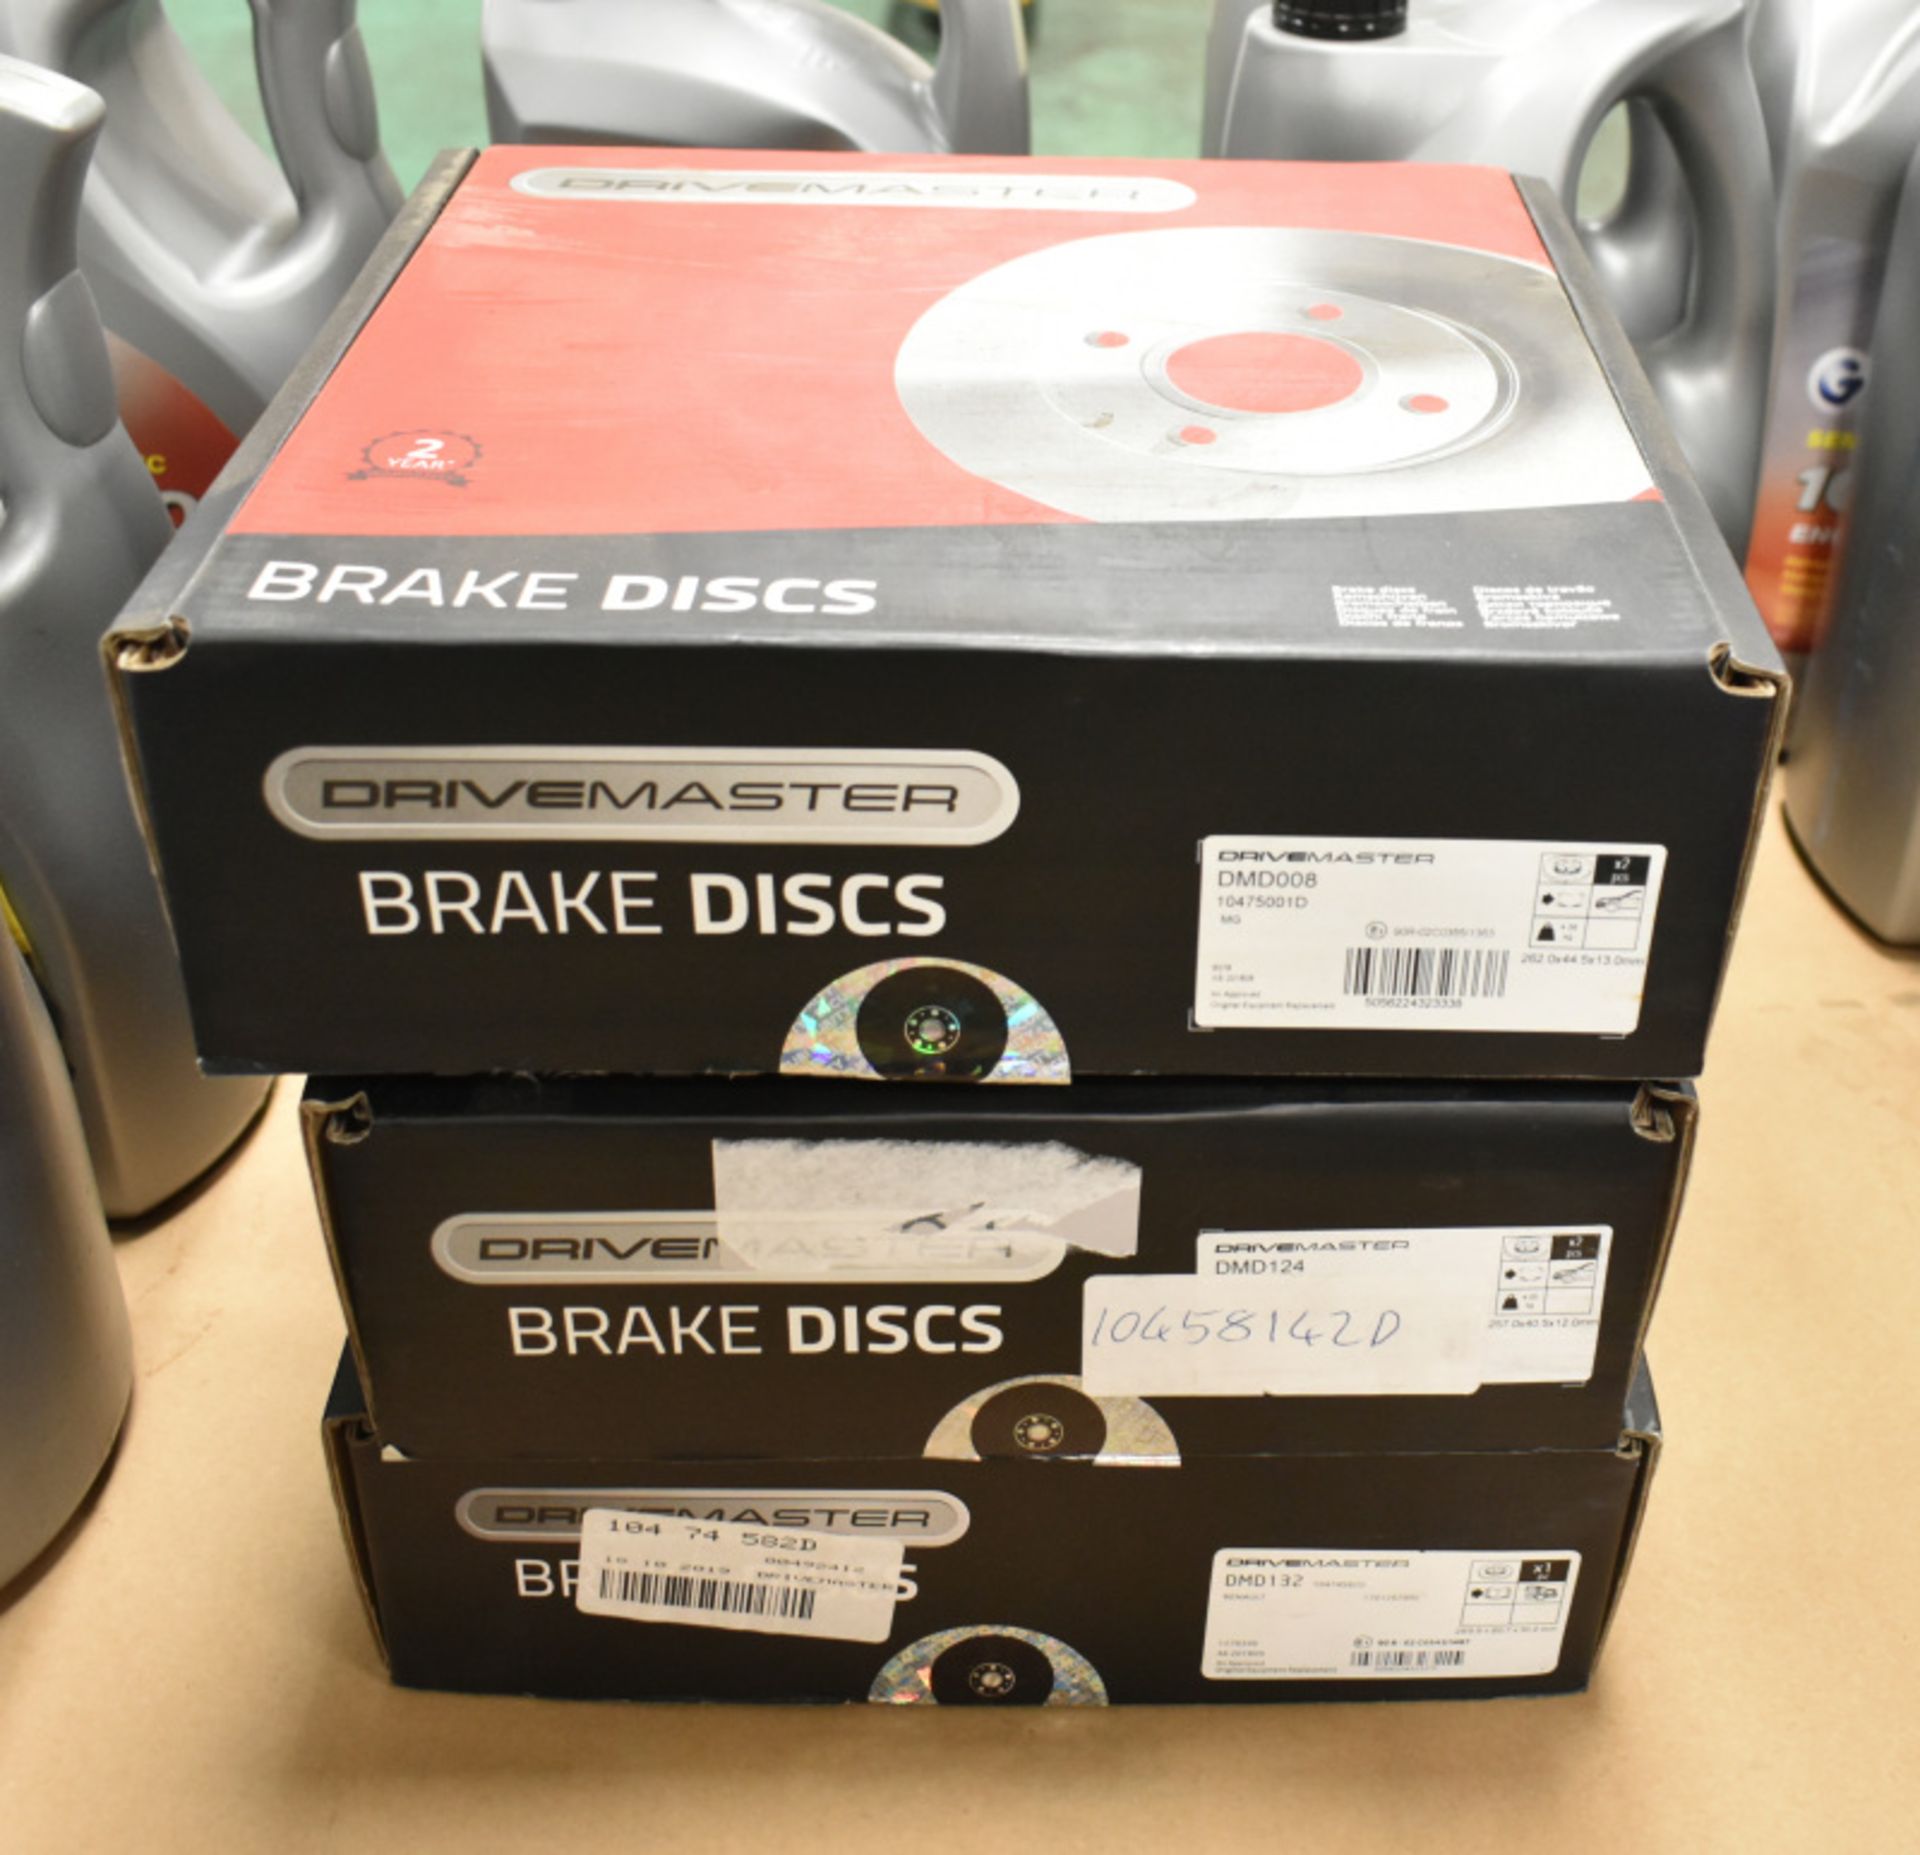 Brake discs - Drumaster, Eicher, Pagid, Engine oil 5LTR Bottles - Carlube RTEC-31 x1 and more - Image 10 of 13